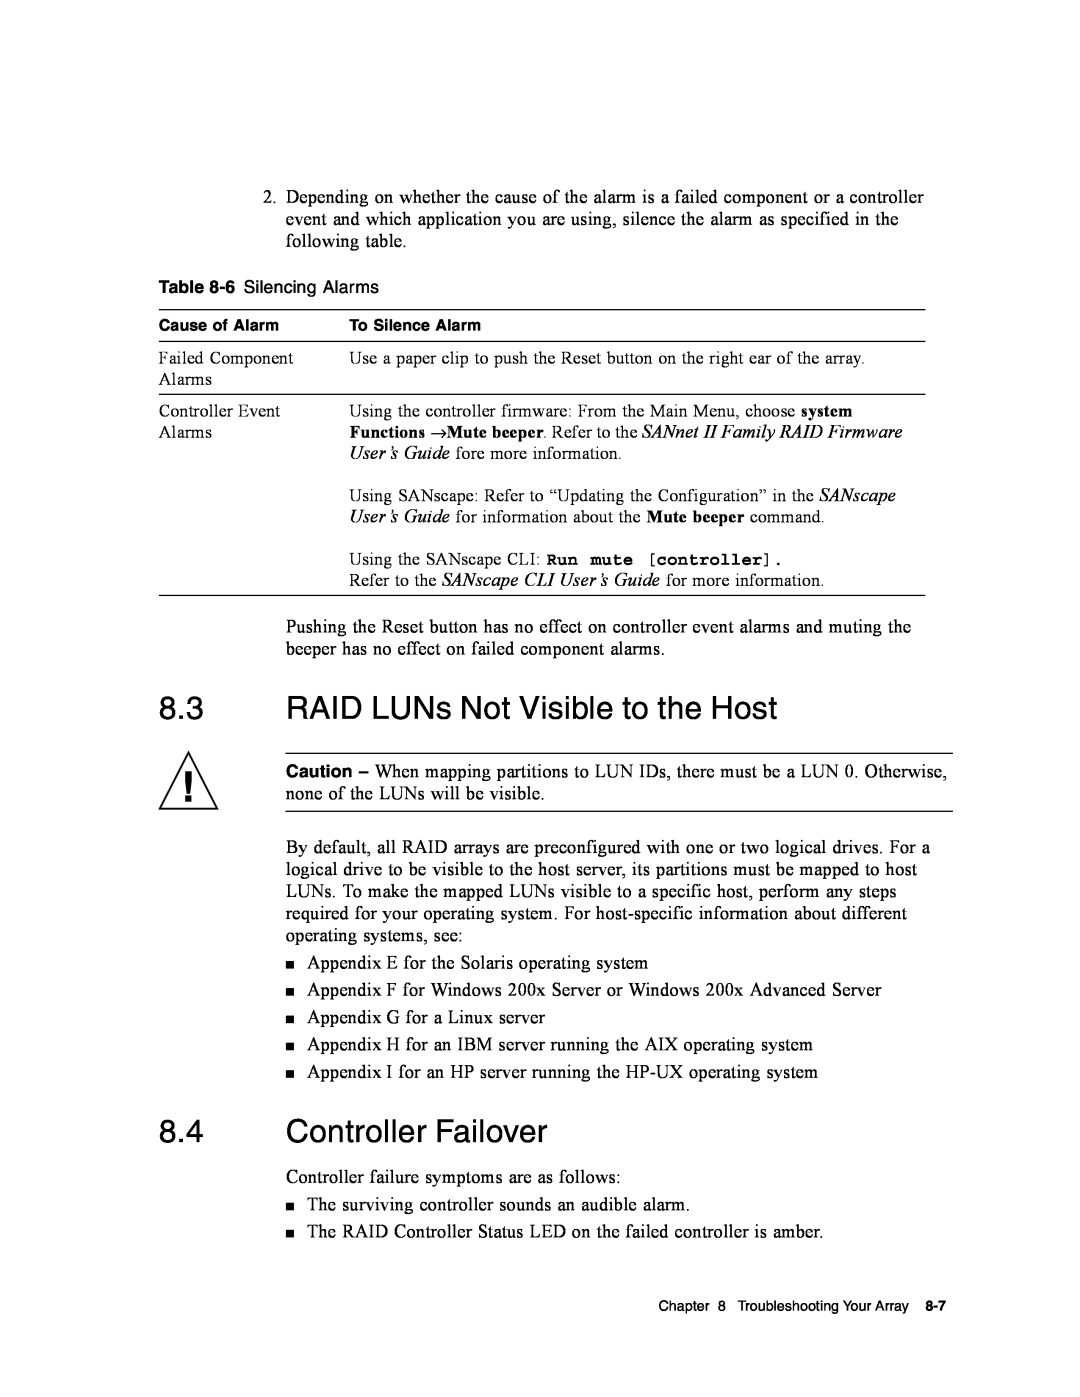 Dot Hill Systems II 200 FC service manual RAID LUNs Not Visible to the Host, Controller Failover 